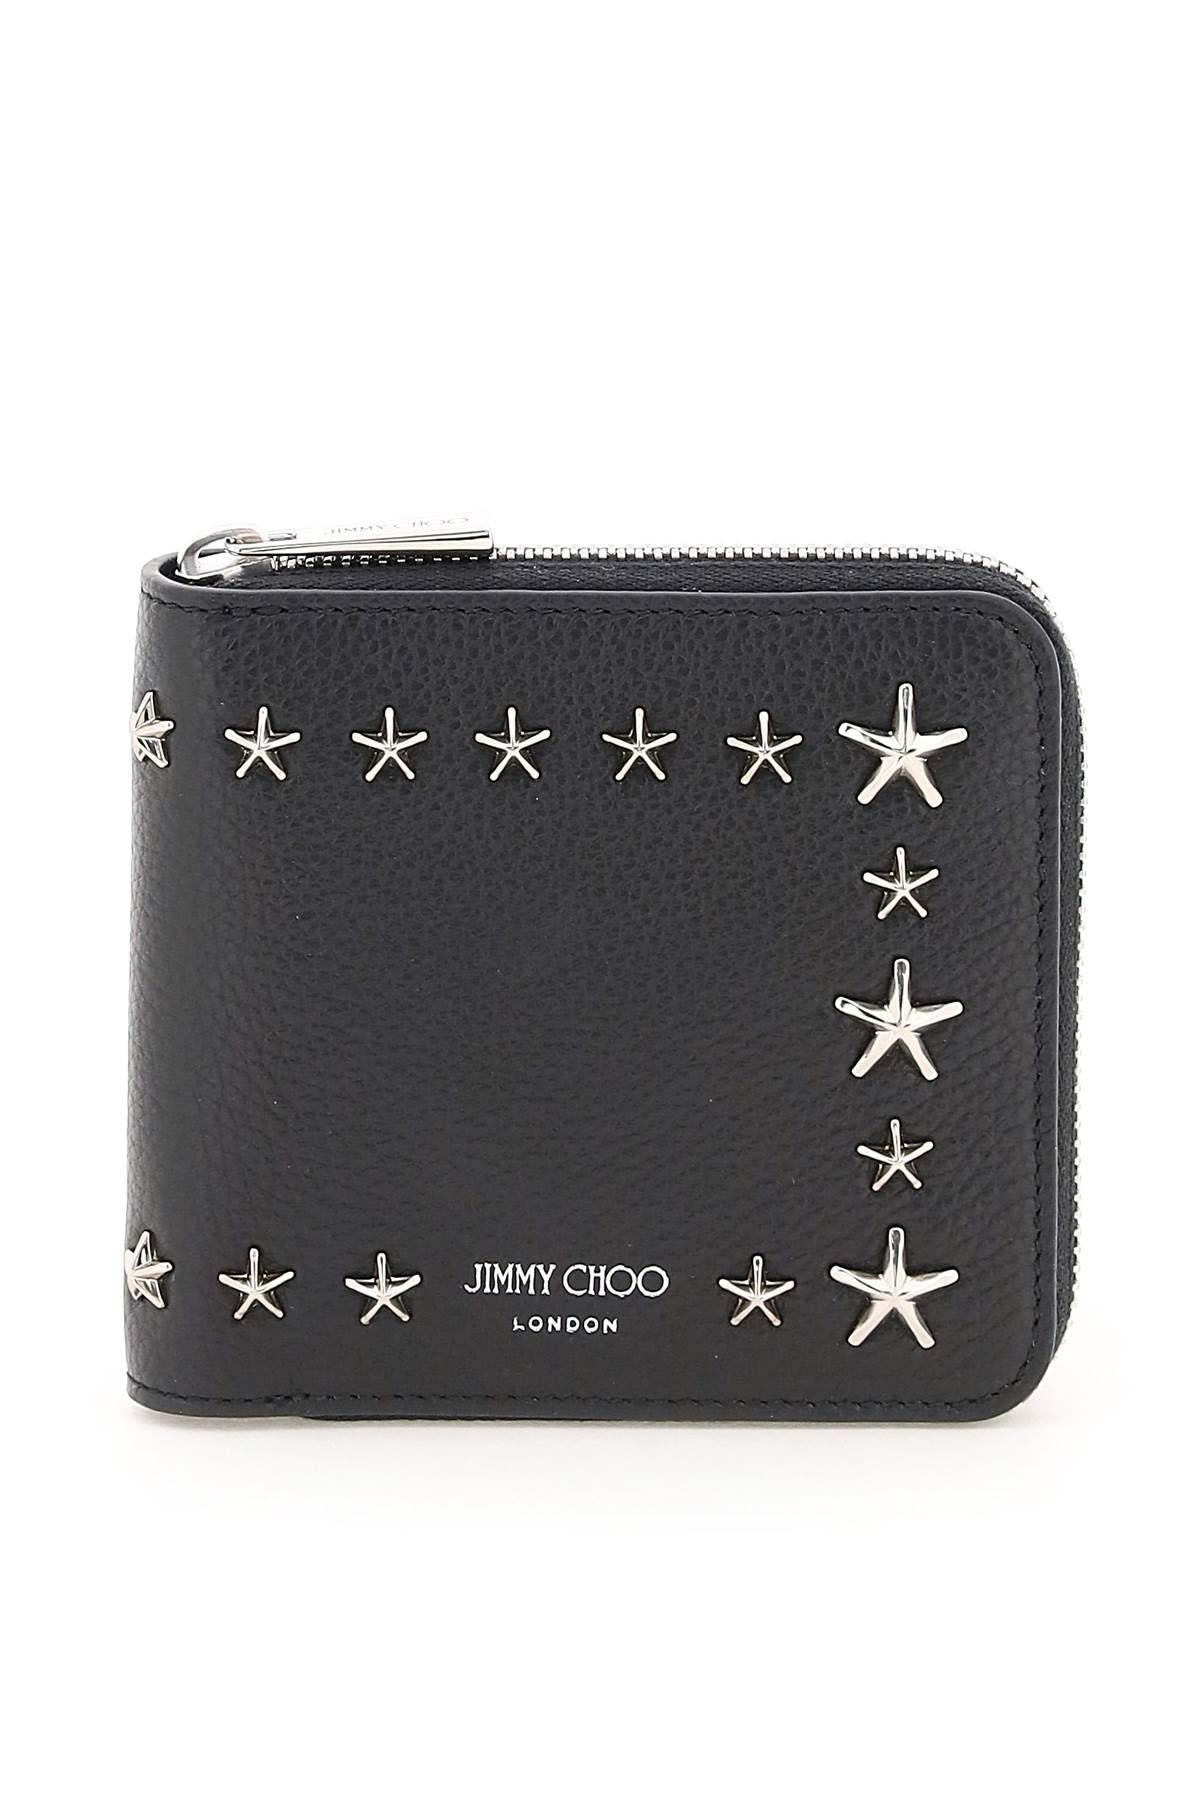 Jimmy Choo Leather Star Zip Around Wallet in Black Silver (Black) for Men -  Save 14% | Lyst